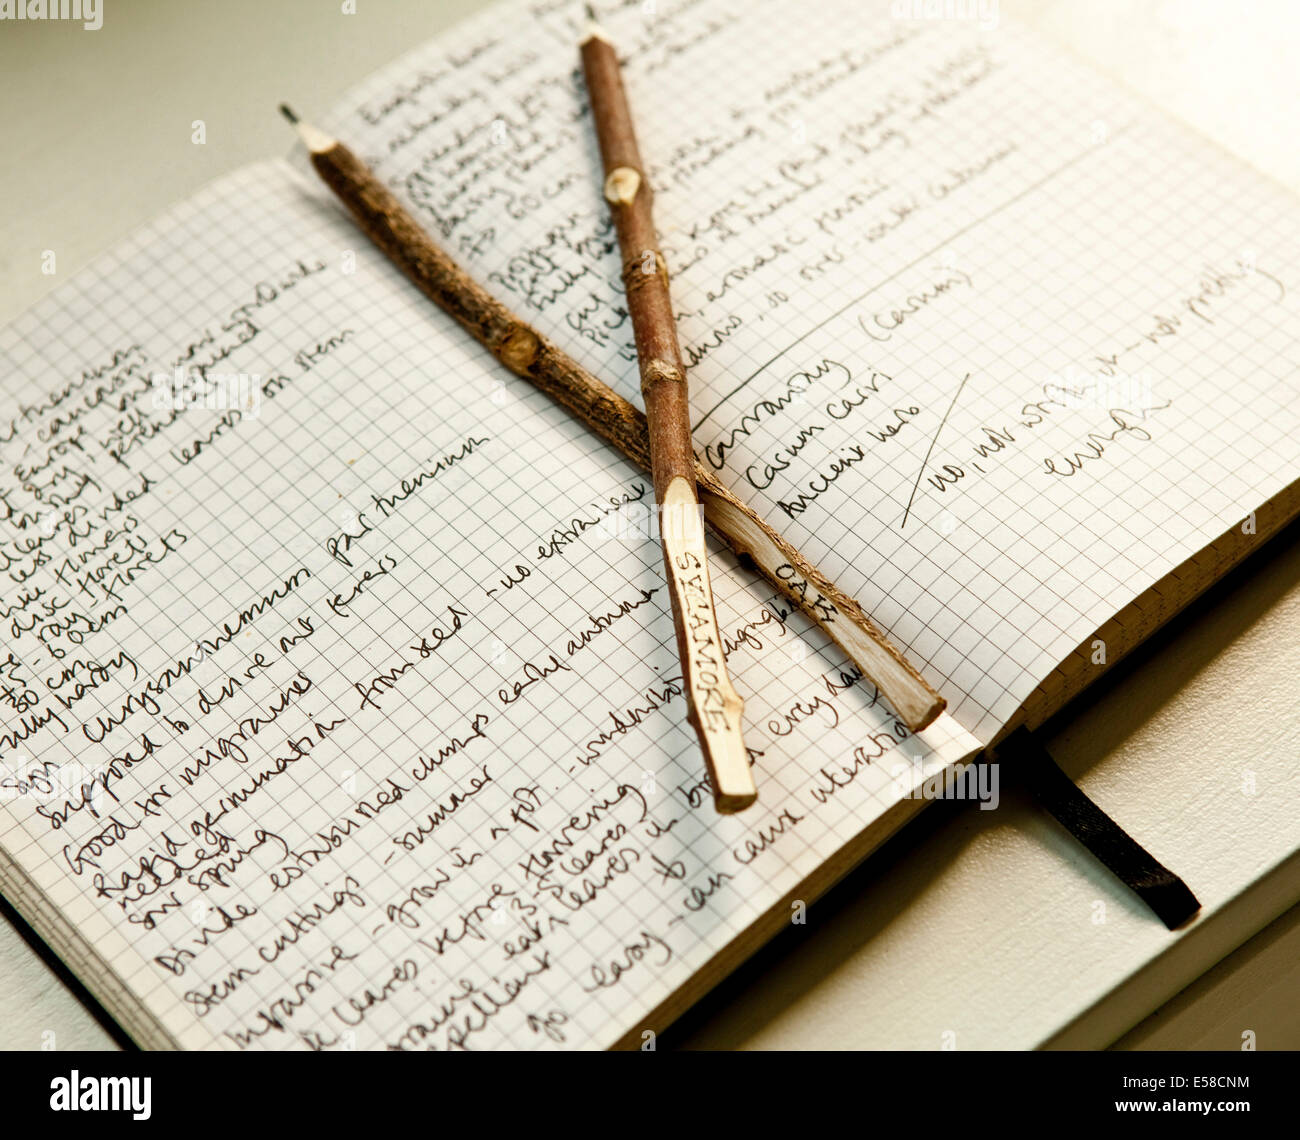 Open diary with handwriting and two wooden pencils in home of writer Laetitia Maklouf, London, UK Stock Photo